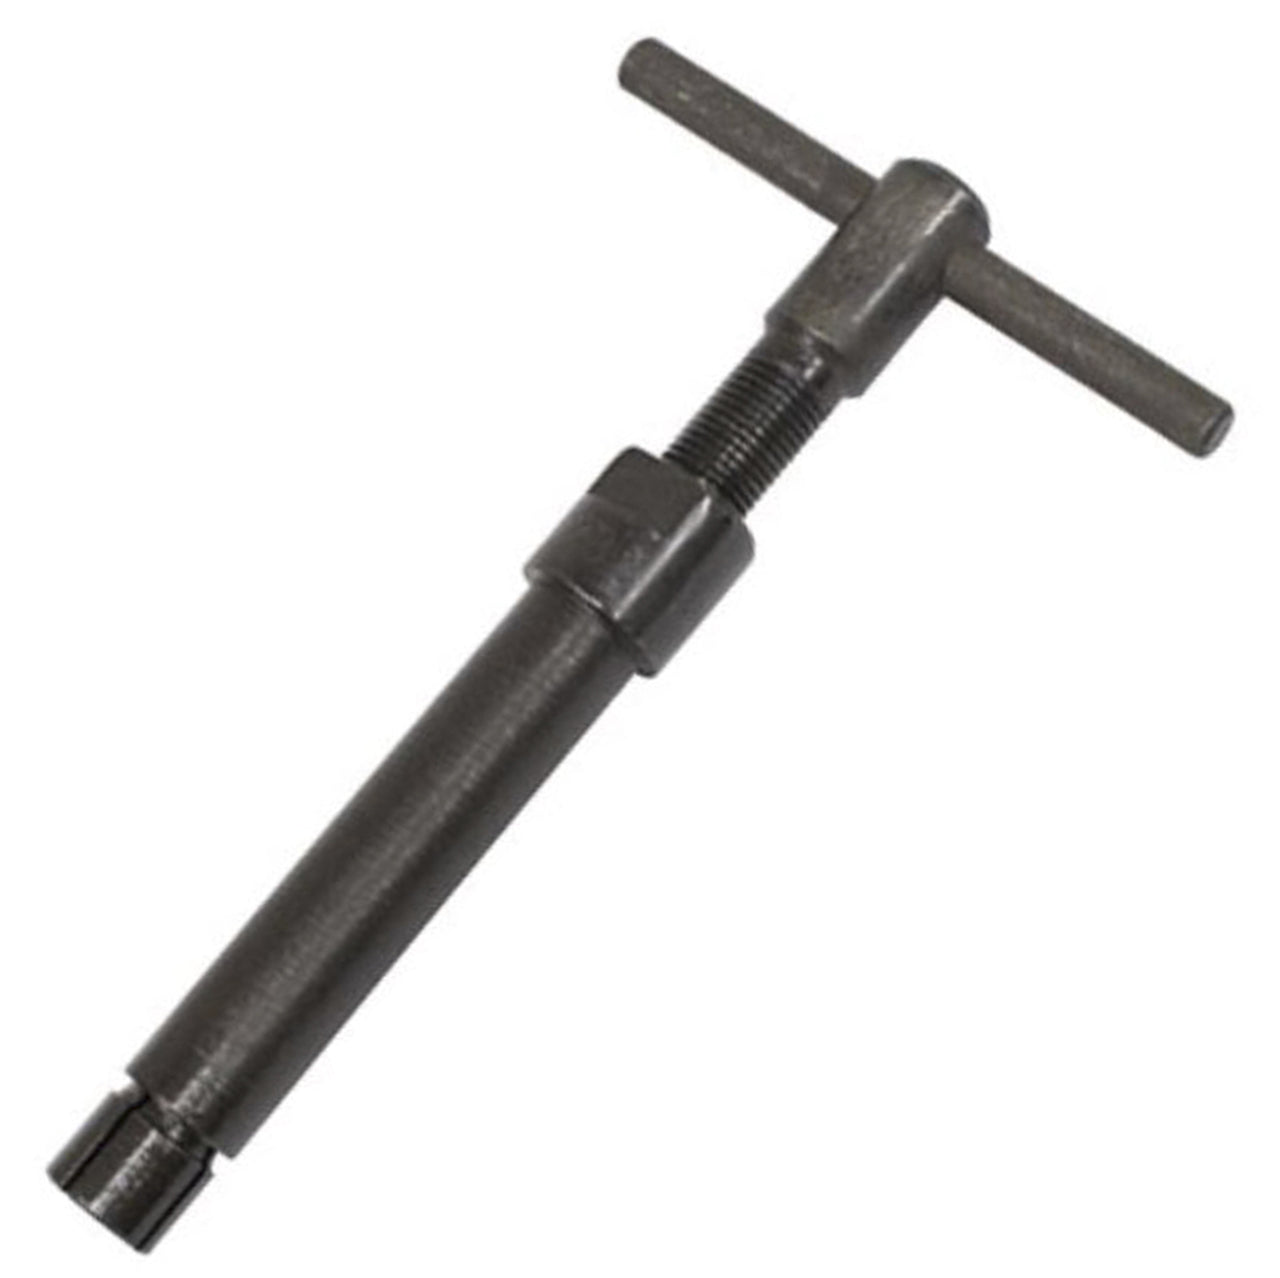 OIL PISTON PULLER TOOL FOR VW AIR-COOLED ENGINES